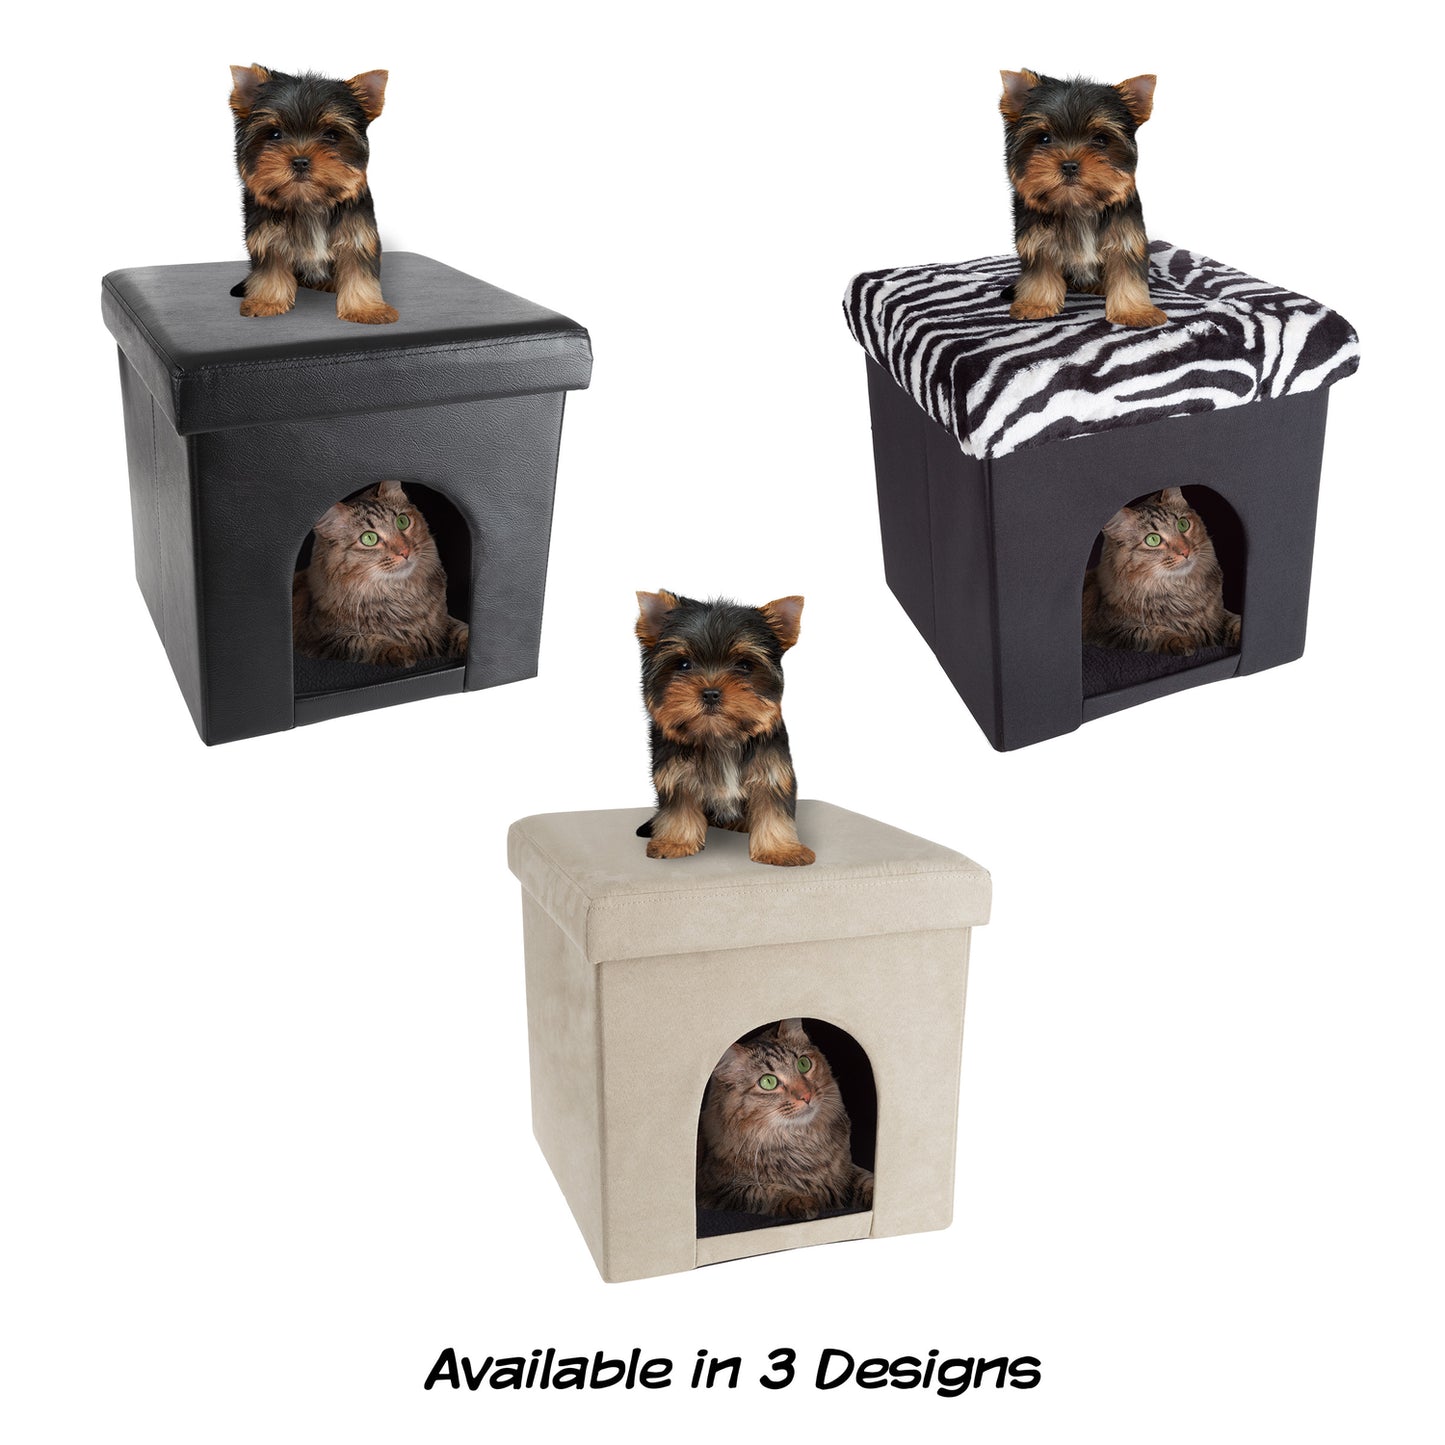 Pet House Ottoman - Collapsible Multipurpose Small Dog or Cat Bed Cube and Footrest with Cushion Top and Interior Pillow by PETMAKER (Microsuede Tan)